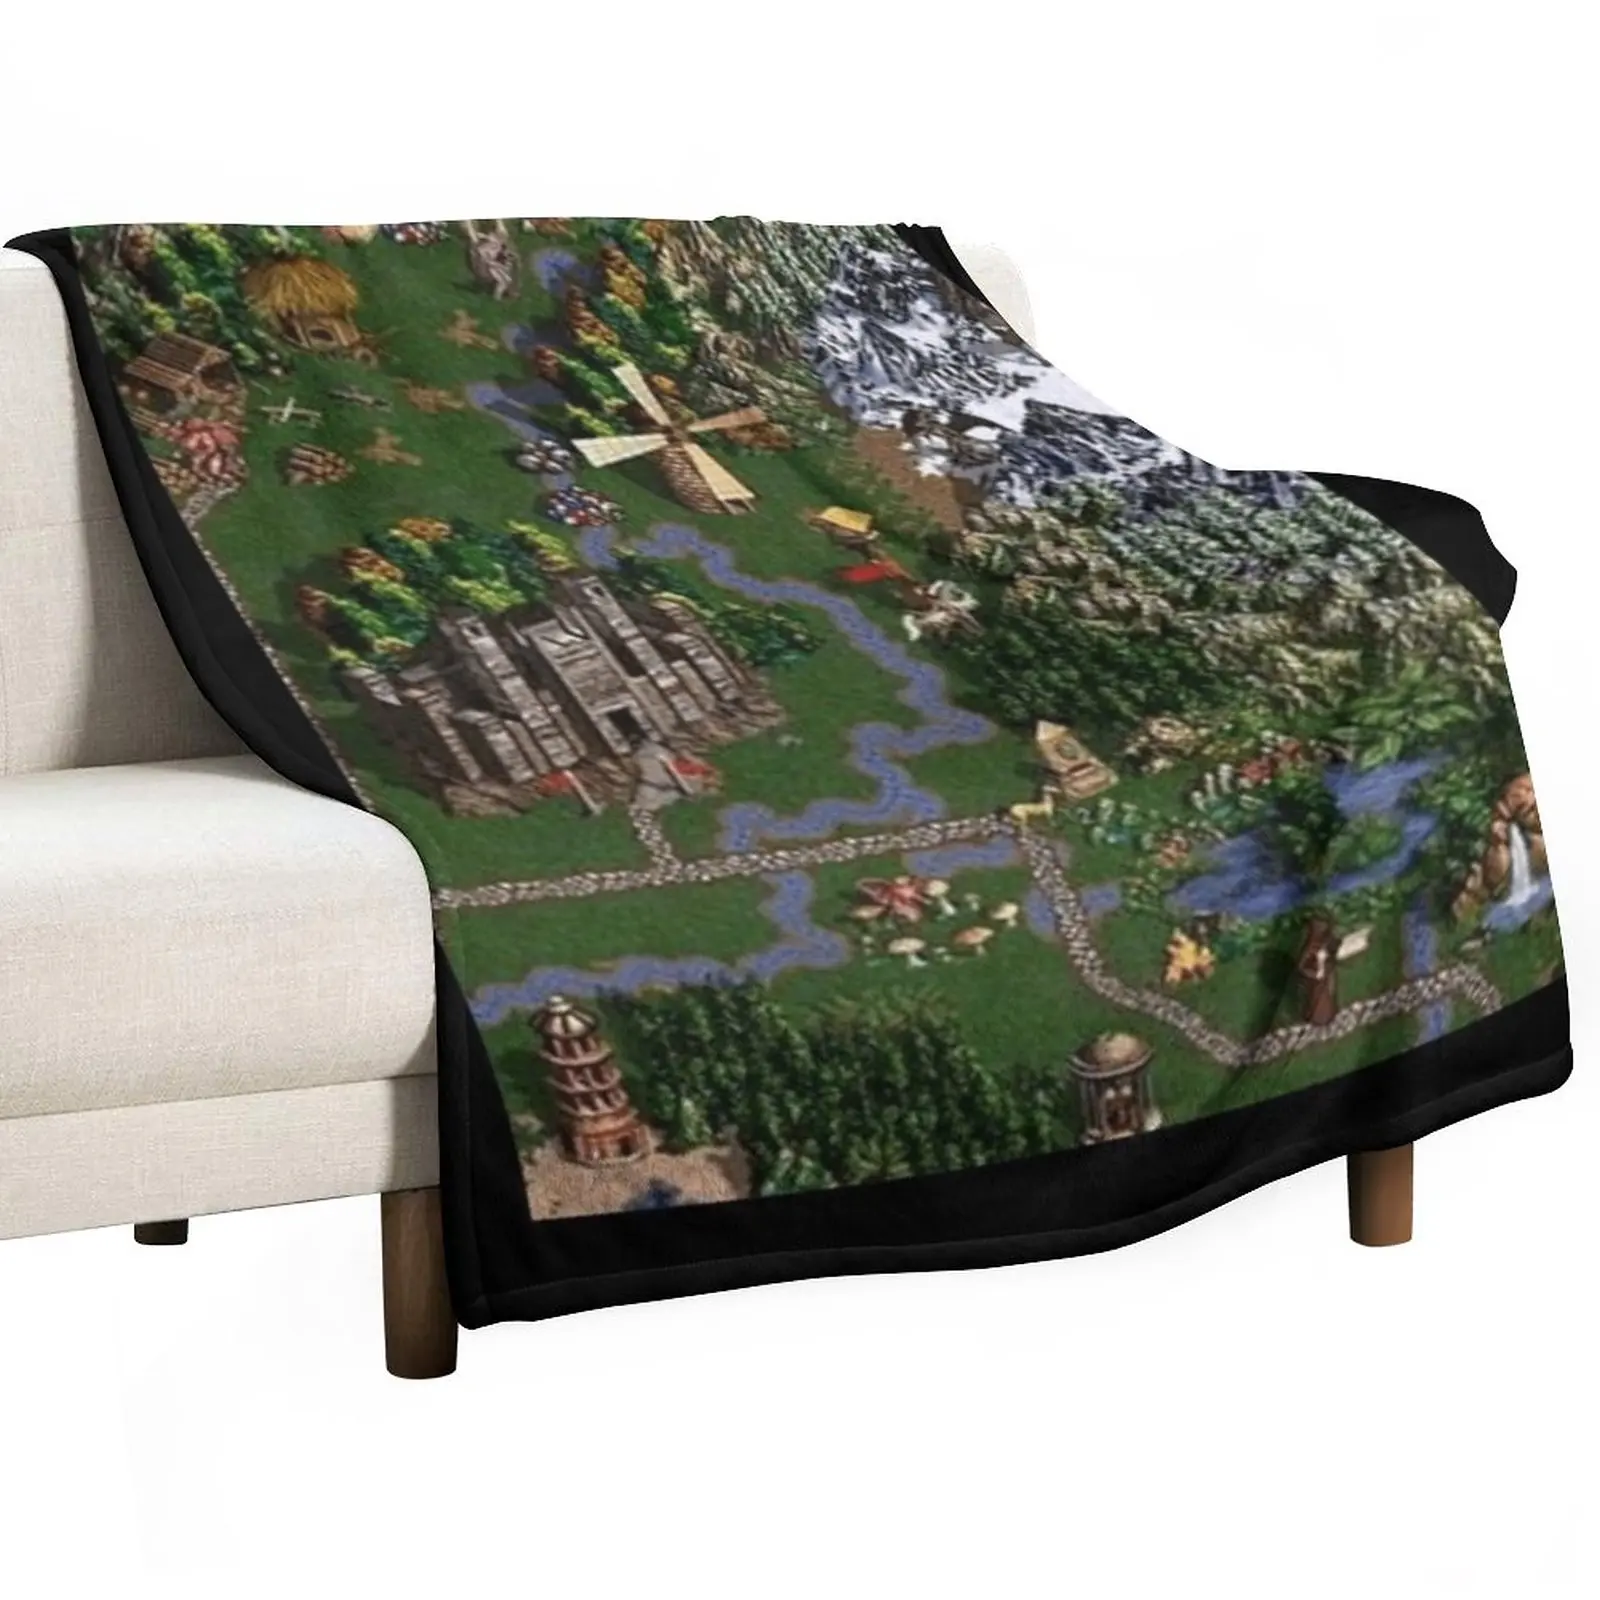 

heroes of might and magic Graphic . Throw Blanket Thermal Blankets For Travel blankets and throws For Sofa Thin Bed covers